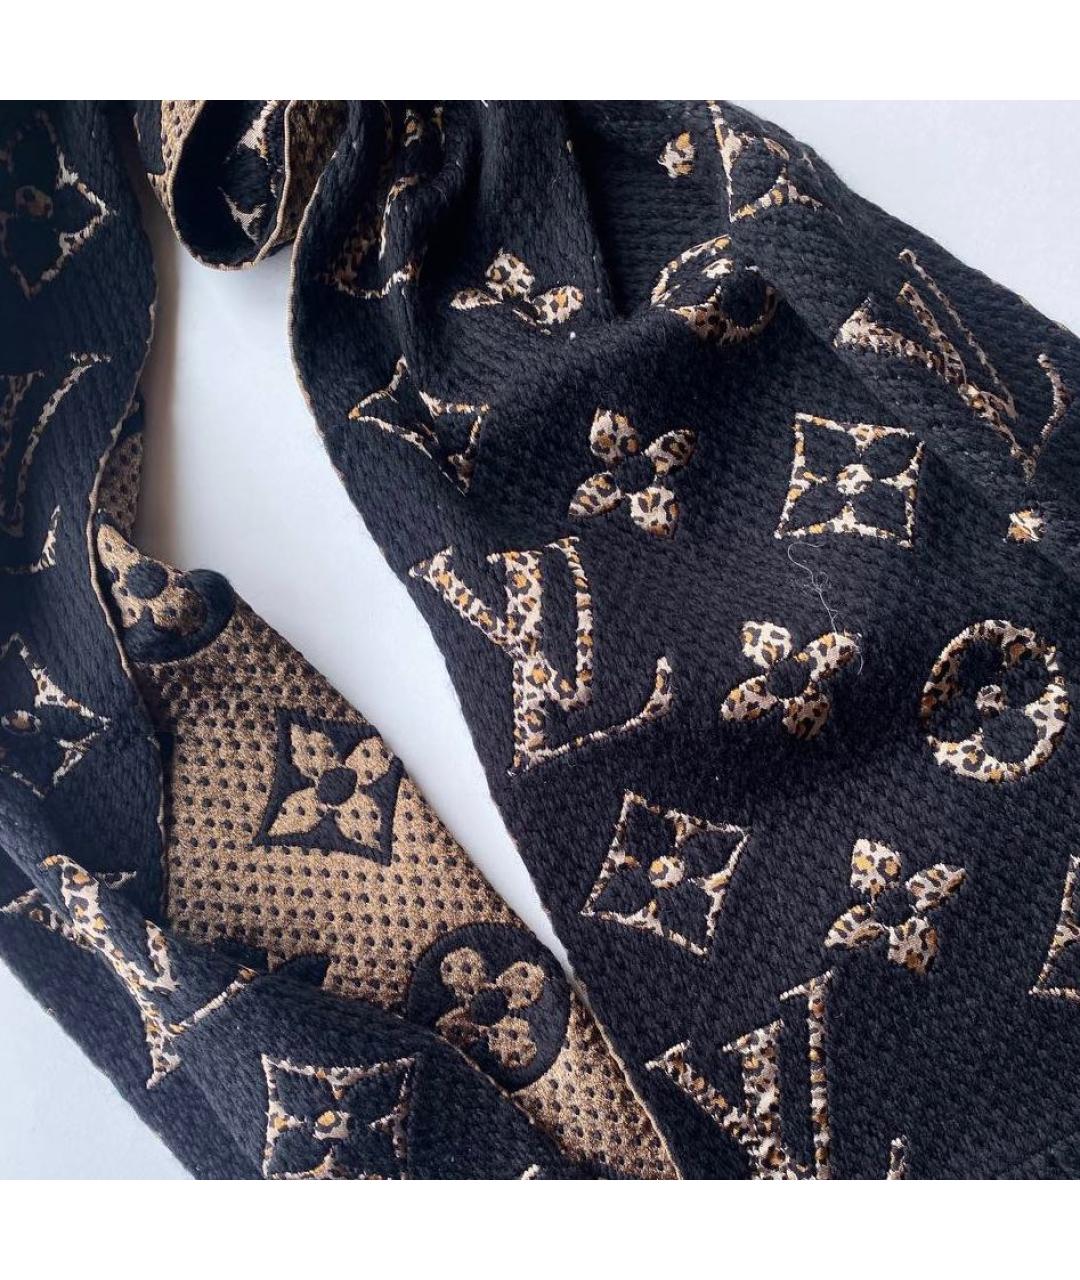 LOUIS VUITTON PRE-OWNED Мульти шерстяной шарф, фото 5